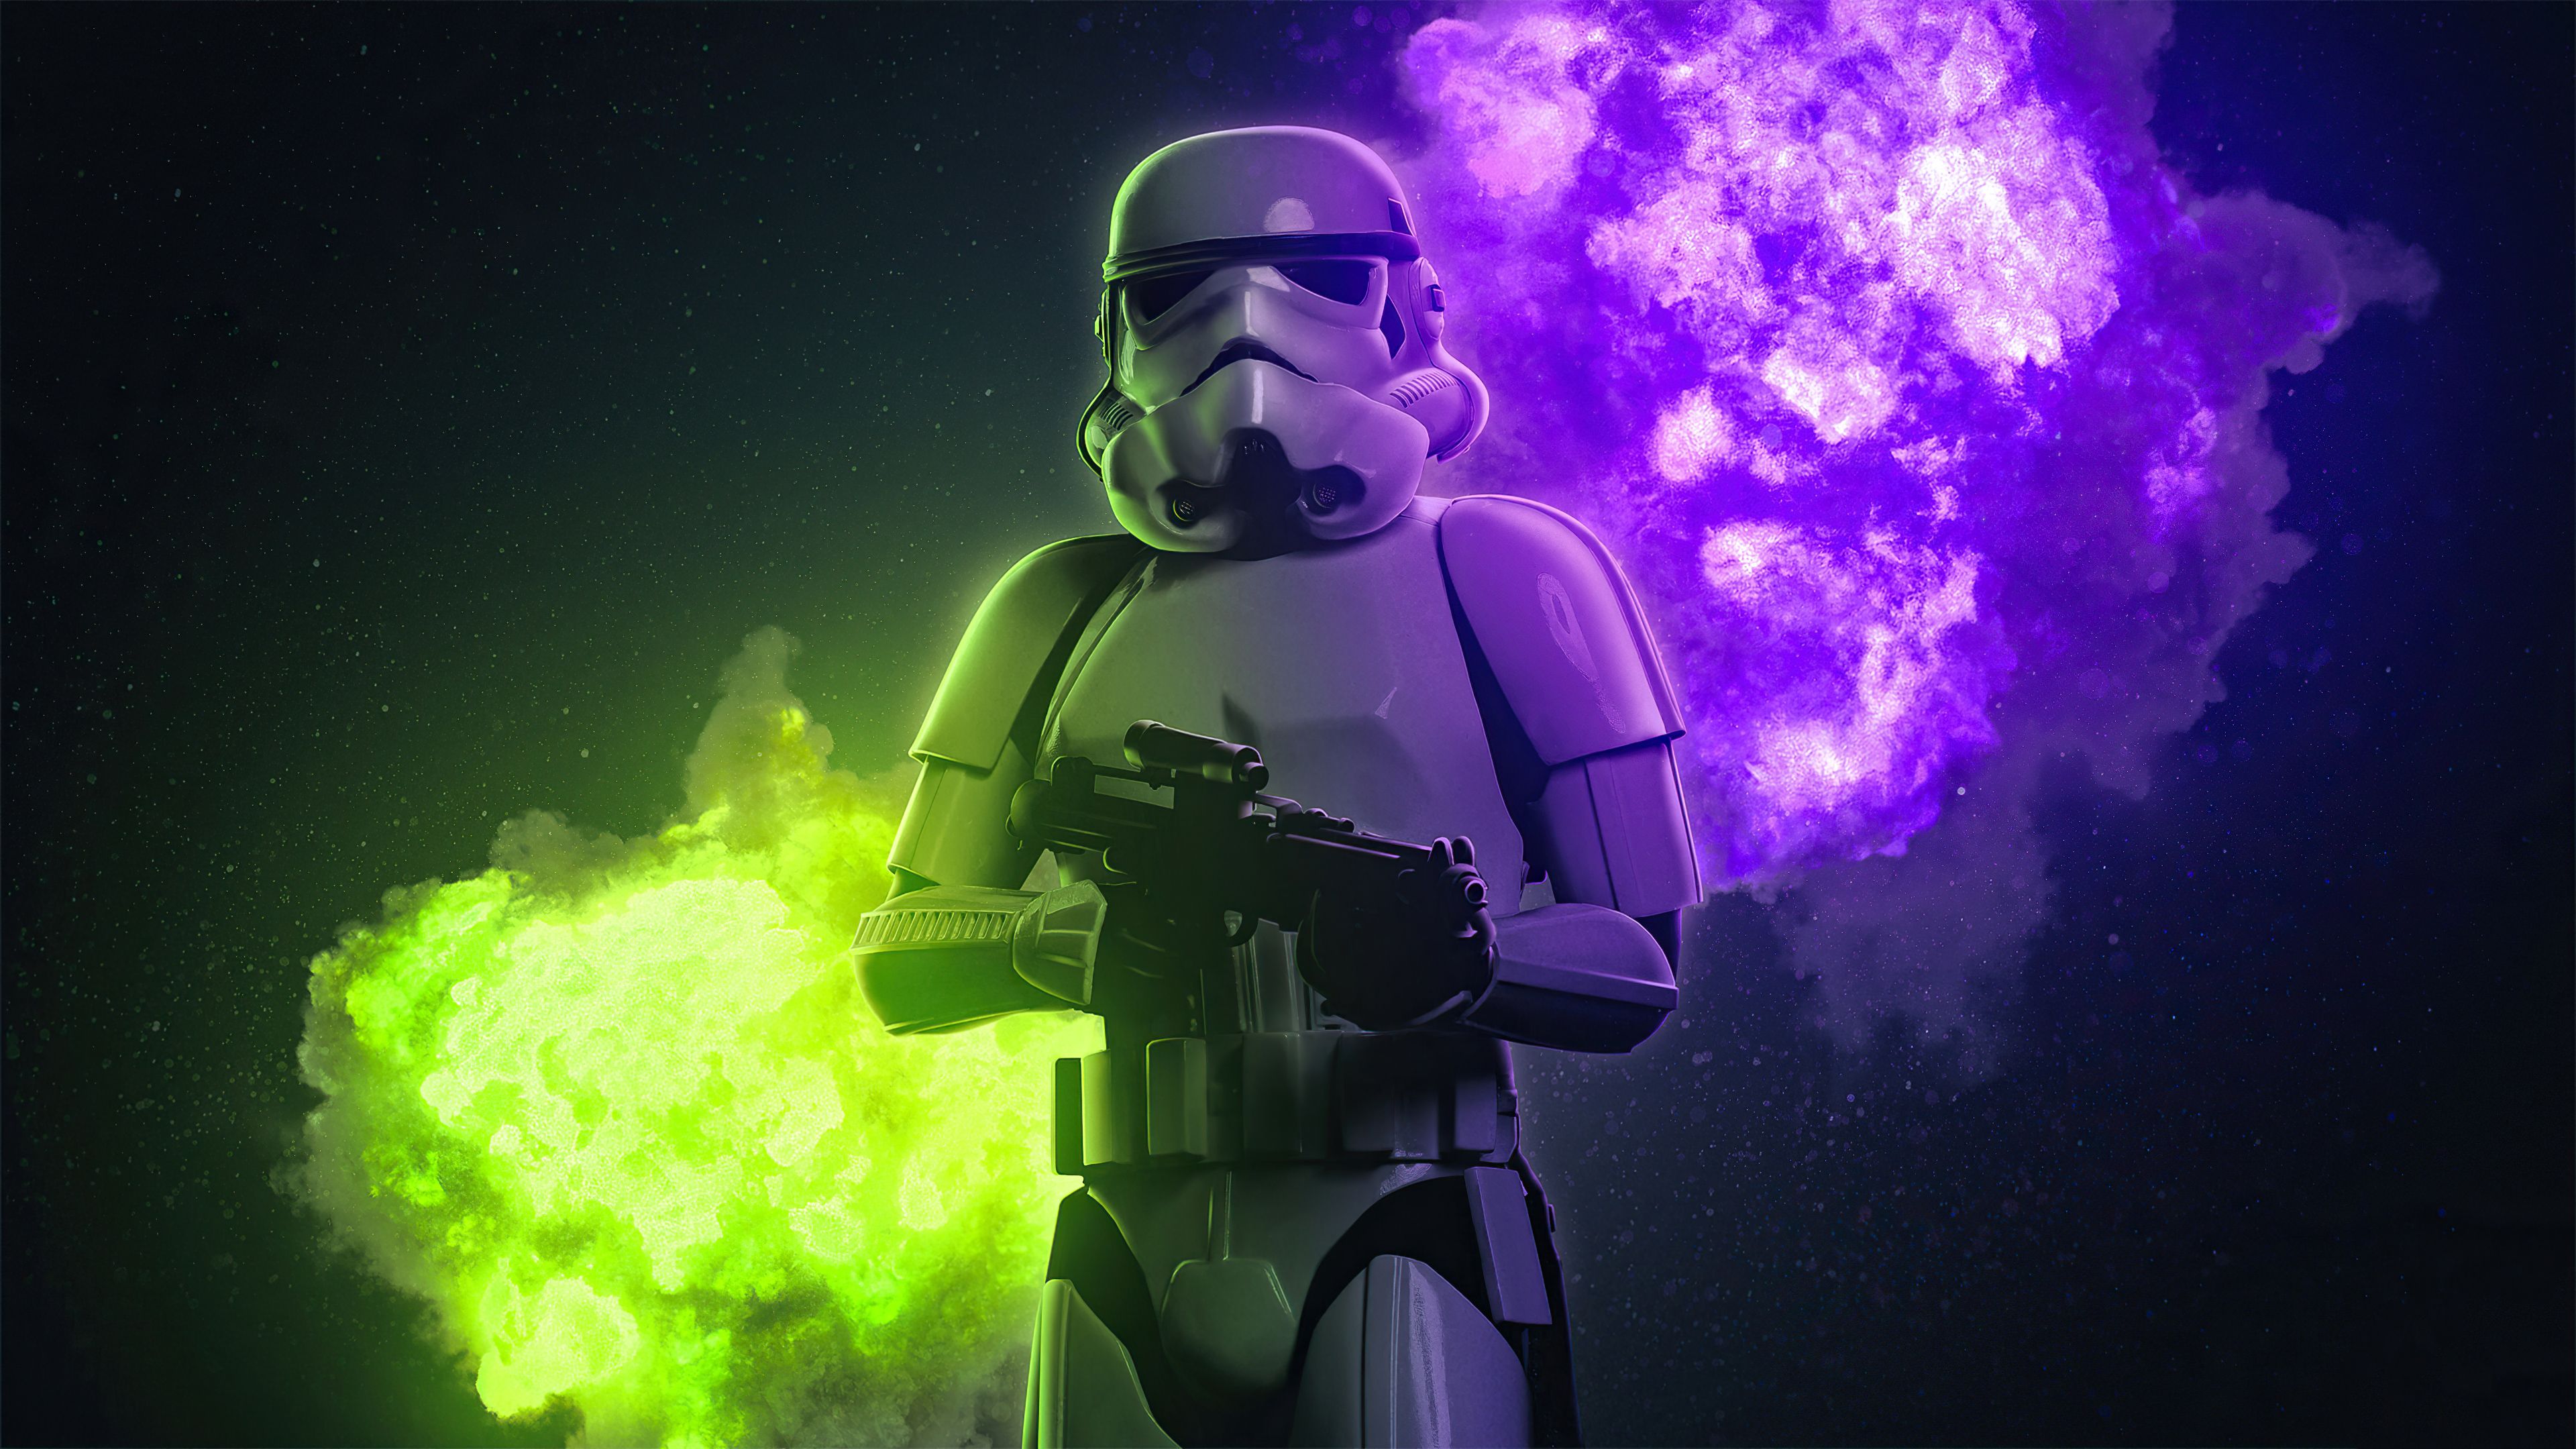 Imperial Stormtrooper 4k, HD Superheroes, 4k Wallpaper, Image, Background, Photo and Picture